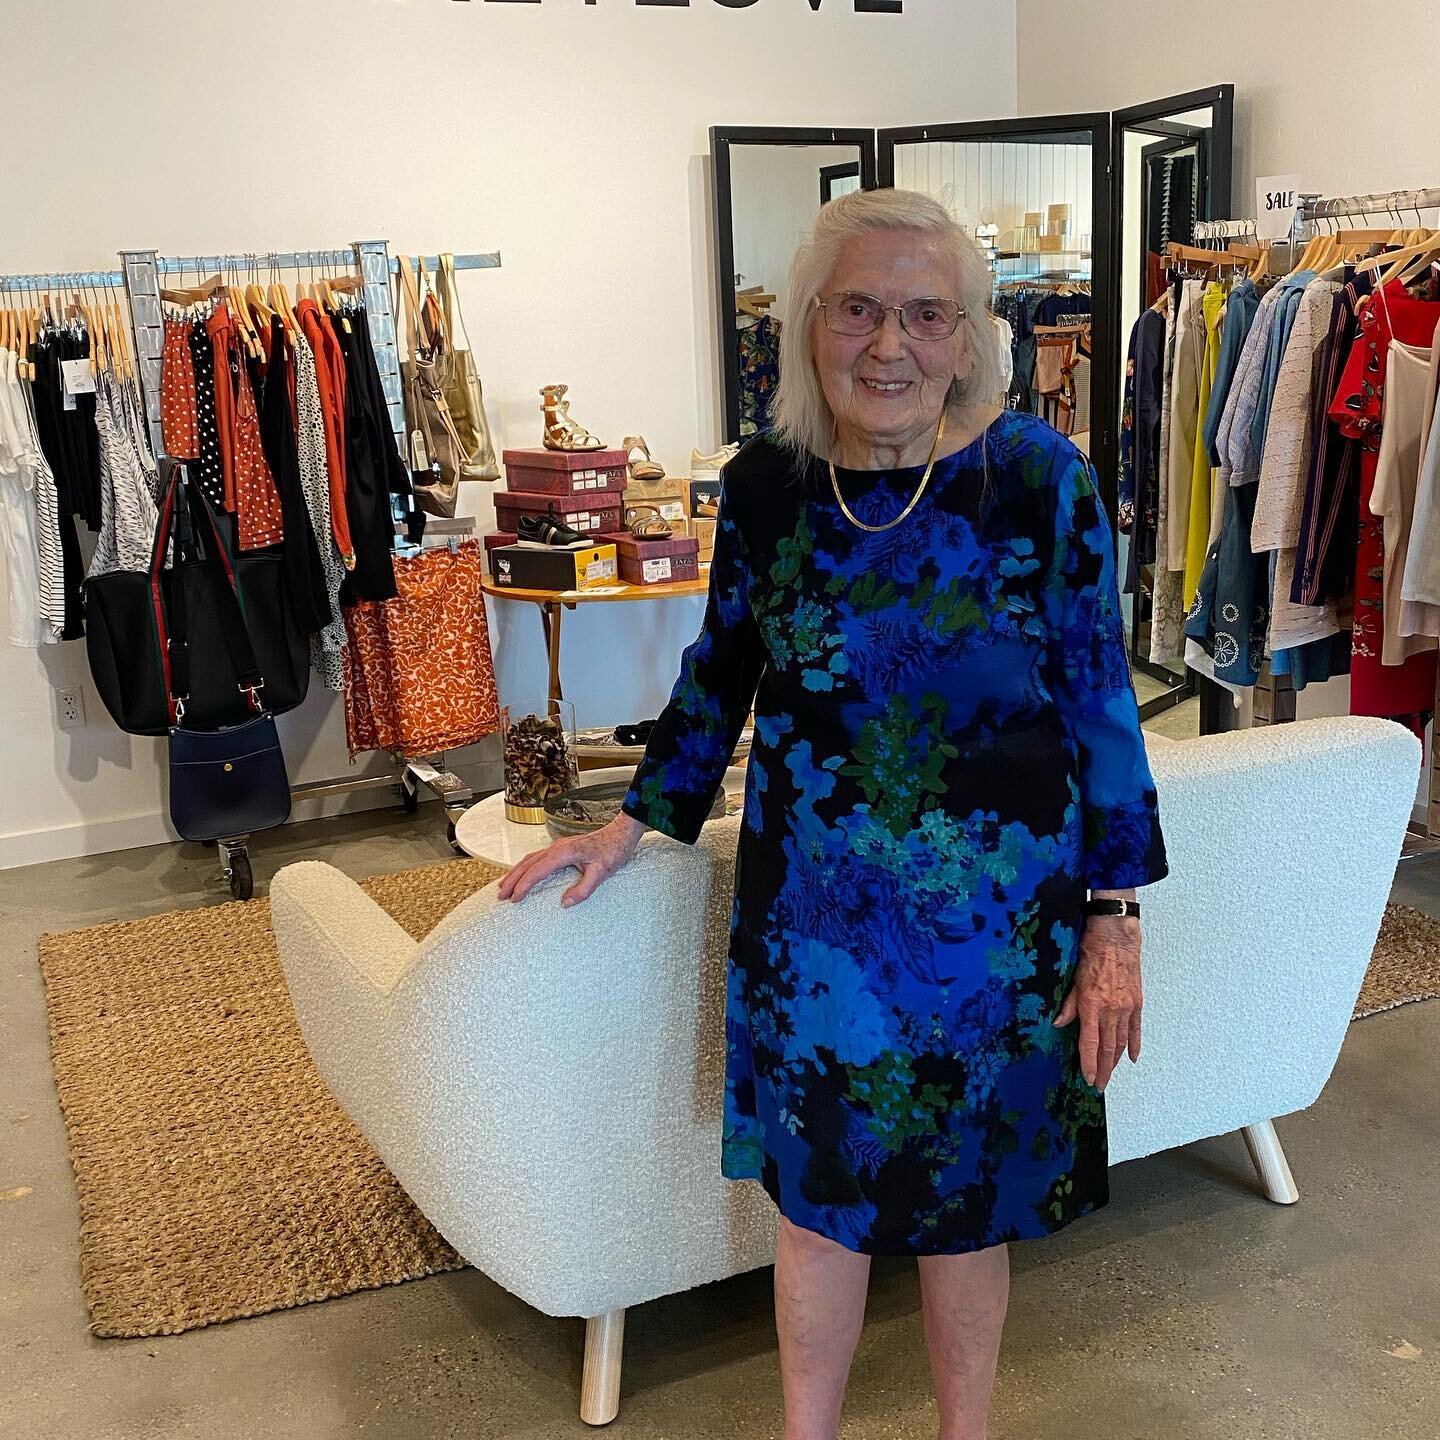 Dorothy Aka: &ldquo;Grandma Dot&rdquo; came in to find a dress for her 99th birthday. Dottie is in town visiting family. She was a long time customer of Mtn Monkey Business and truly loves our new store, MonkeyLove. What a pleasure she is. Thank you 